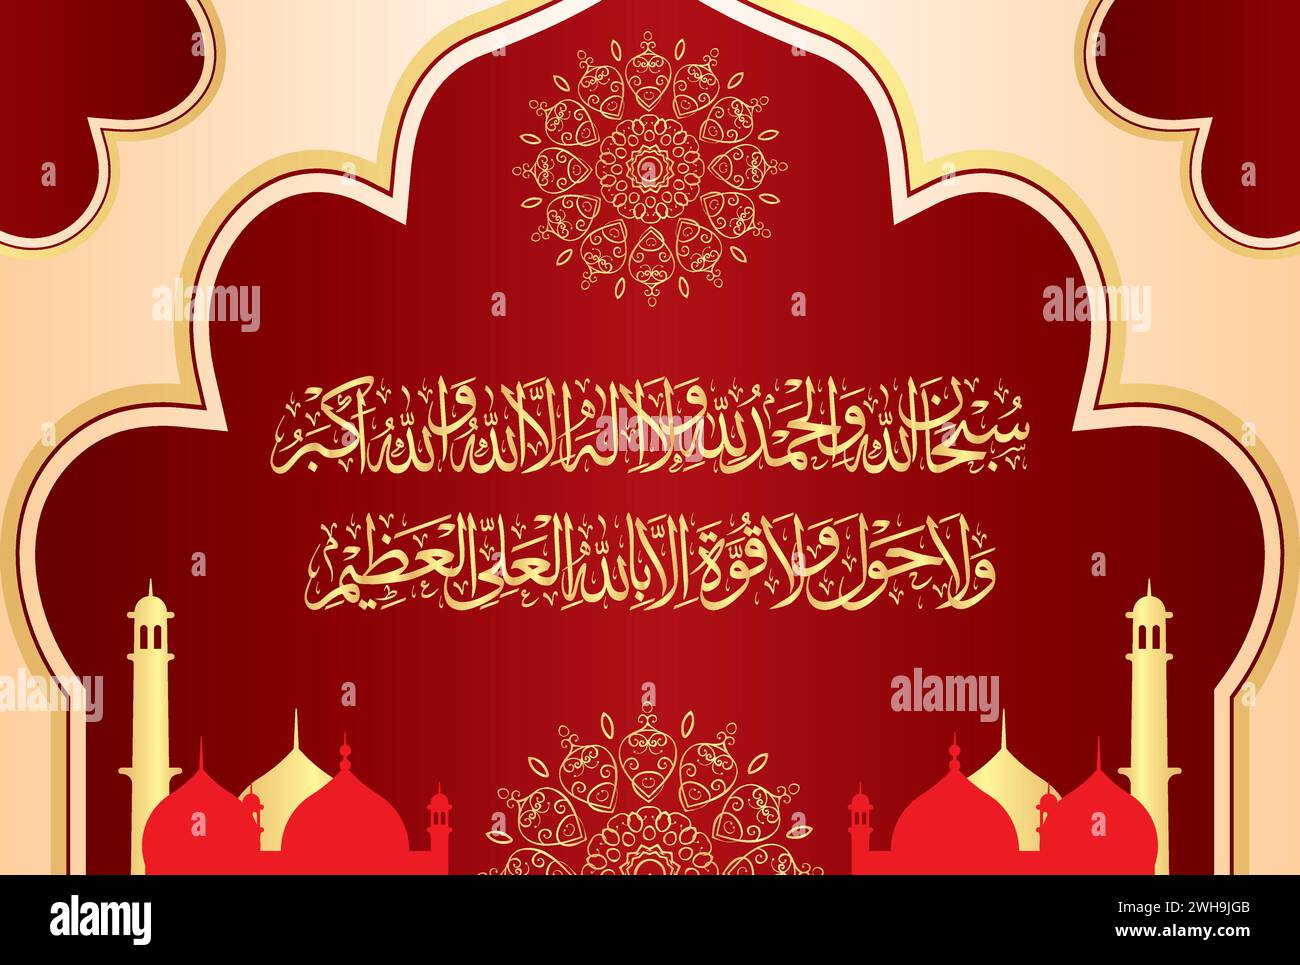 Arabic Calligraphy of 3rd Kalma Tamjeed. Translation, 'Glory (is for) Allah. And all praises for Allah. And (there is) none worthy of worship except... Stock Vector